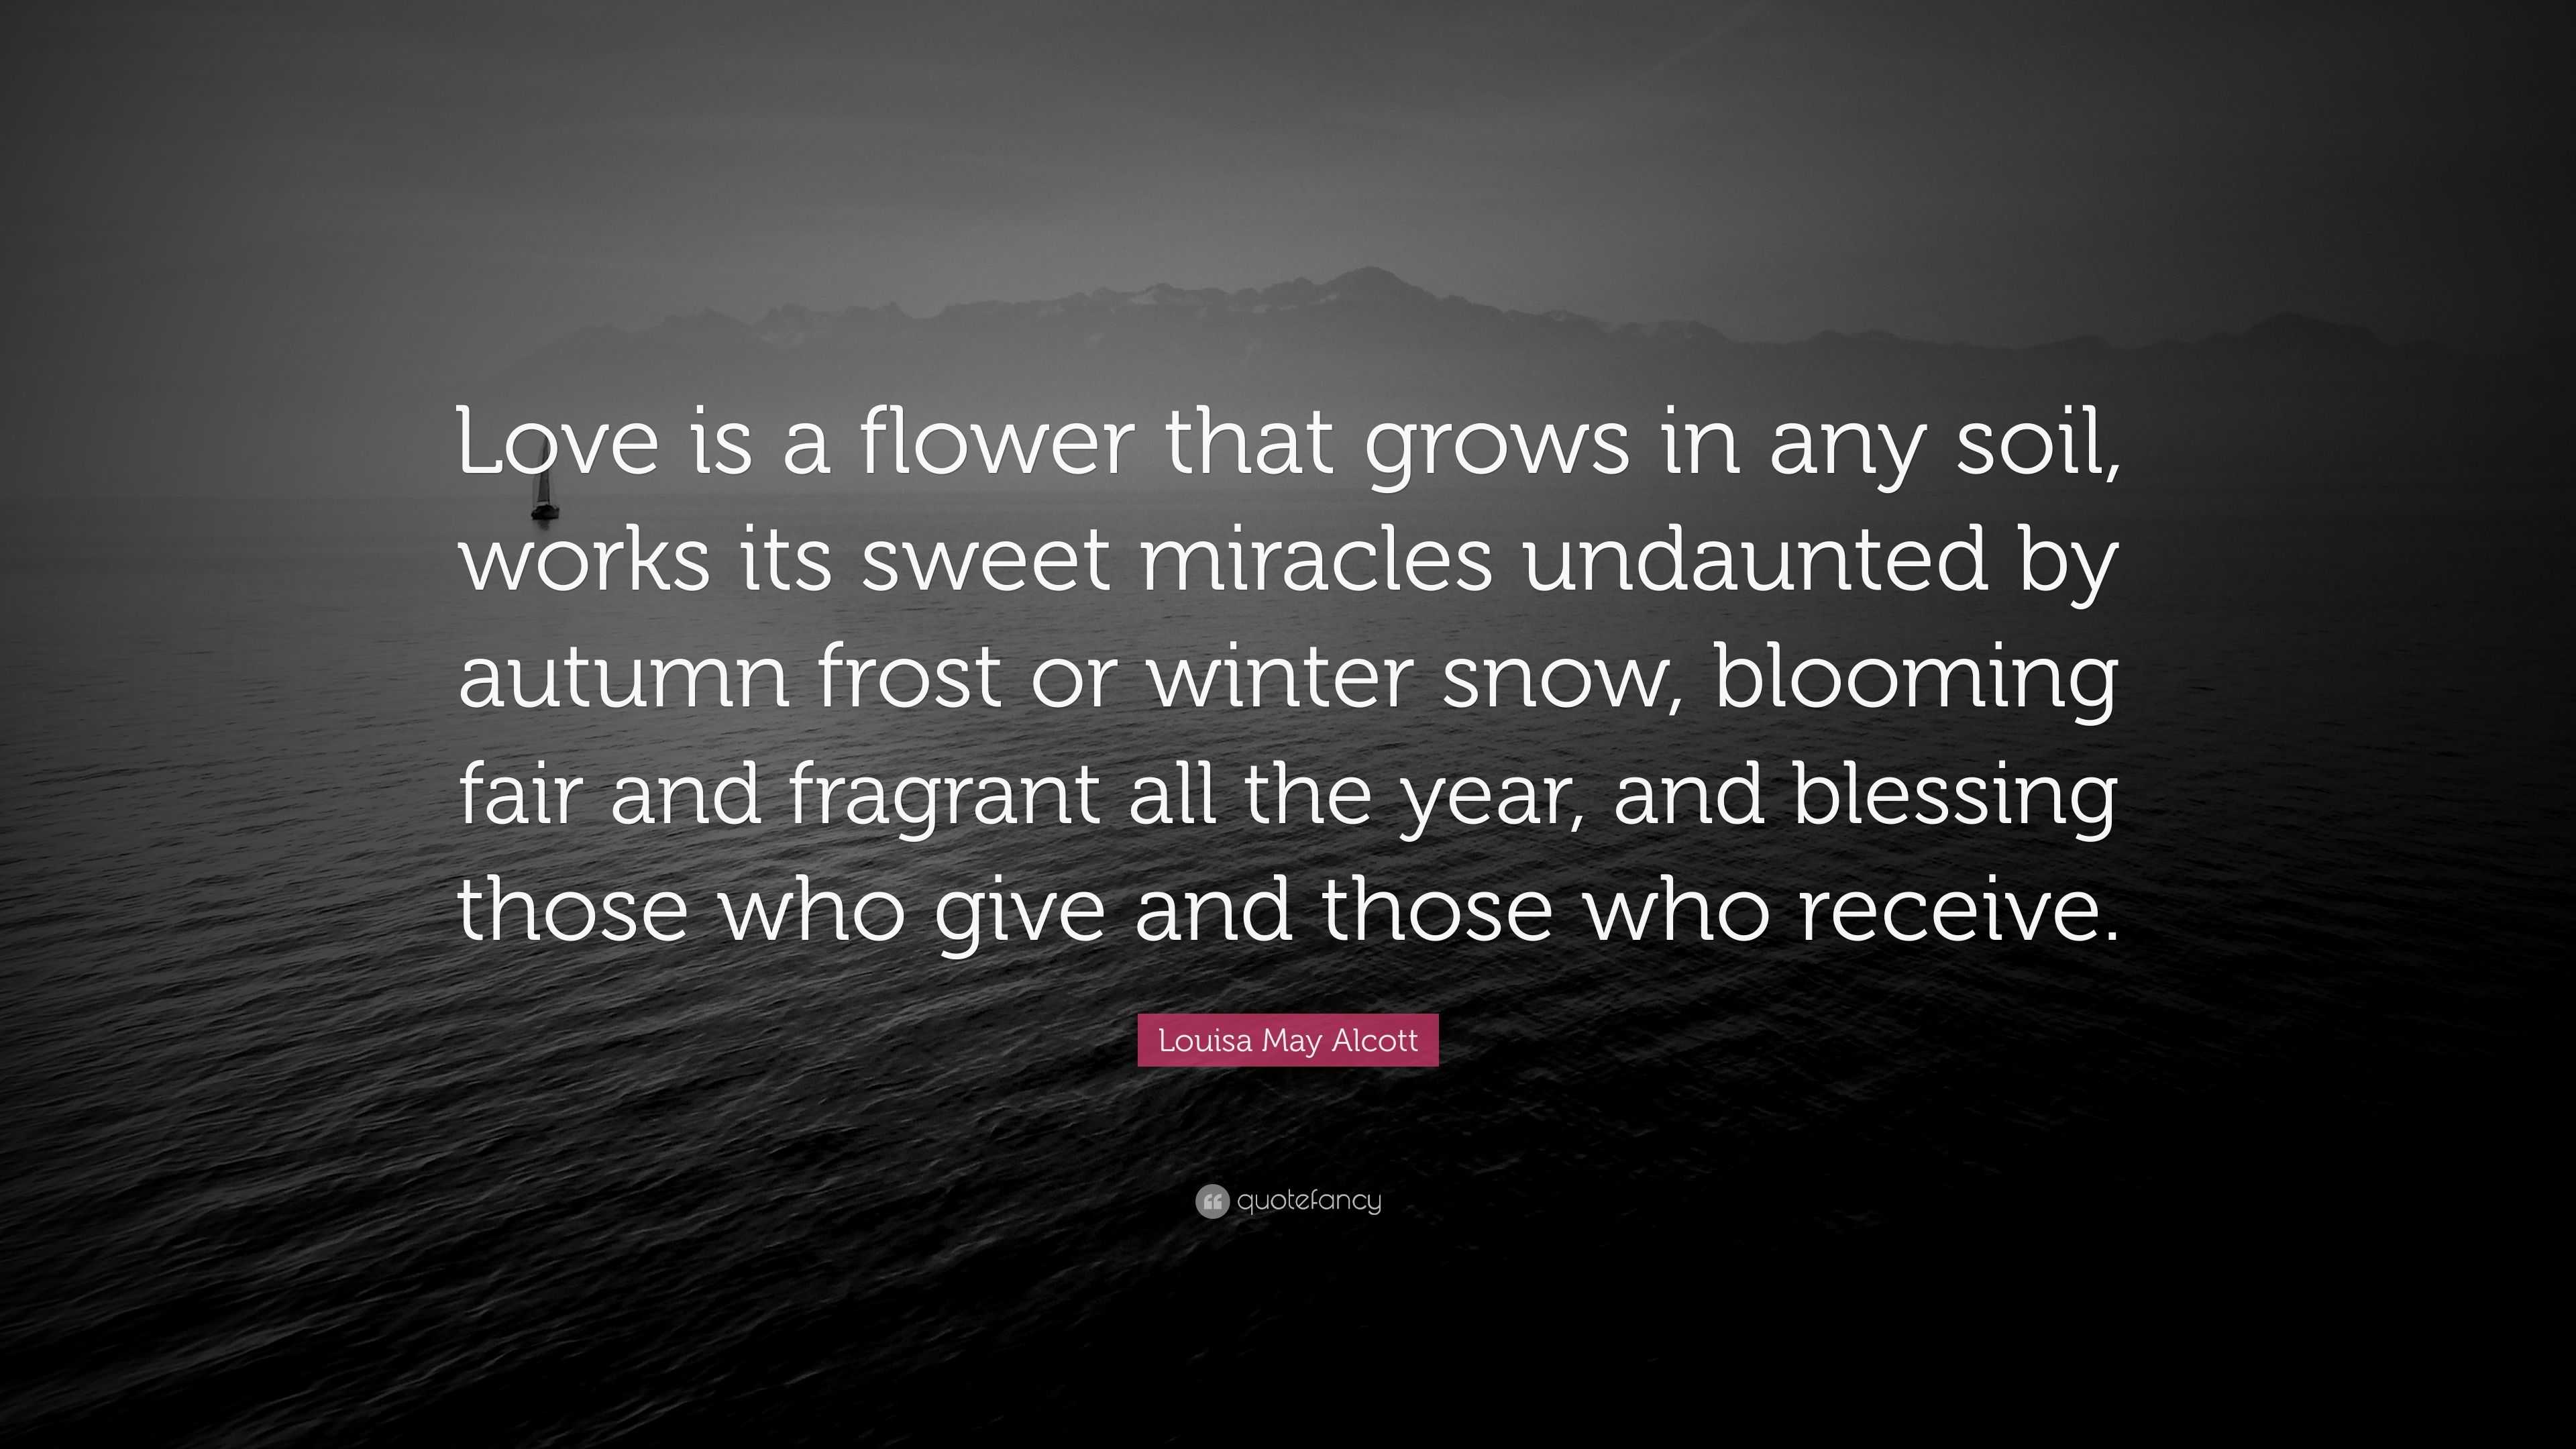 Louisa May Alcott Quote: “Love is a flower that grows in any soil